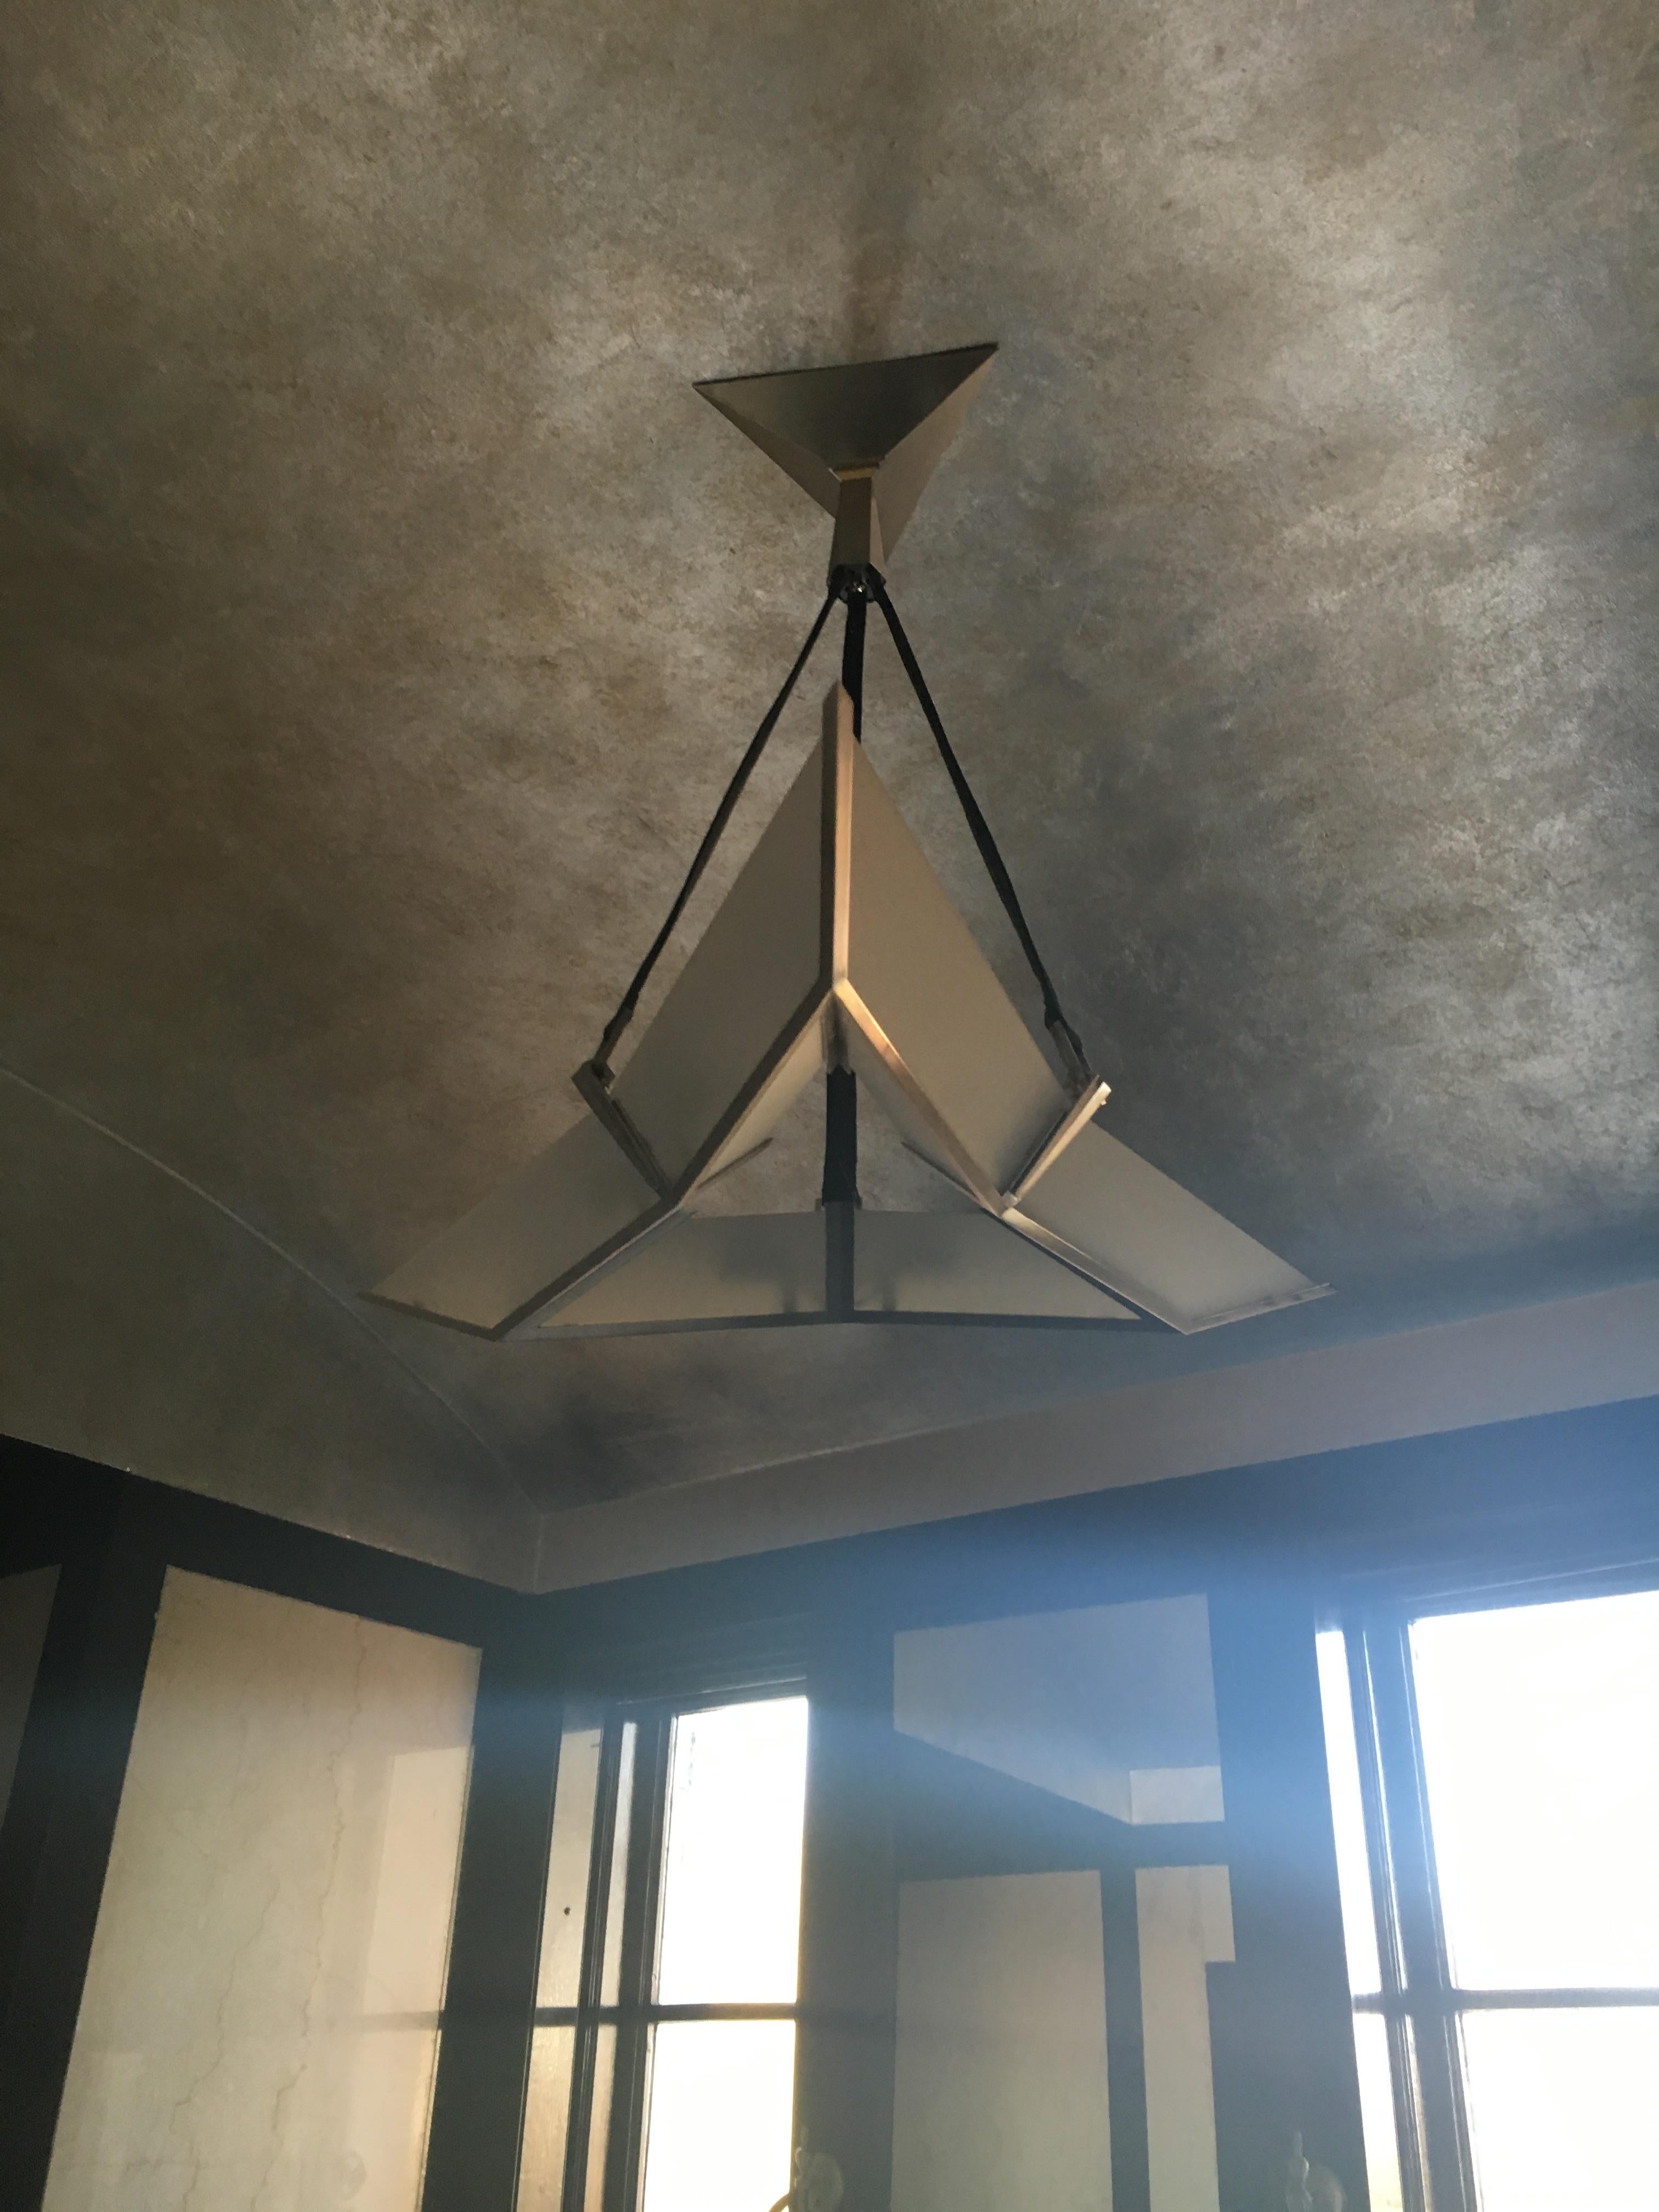 #20035 Etoile Maison Baguès chandelier. Finish: Polished nickel (other finishes available)
Leather and polished nickel over bronze

UL listing available for an additional fee (install photo shown with shorter projection).
  